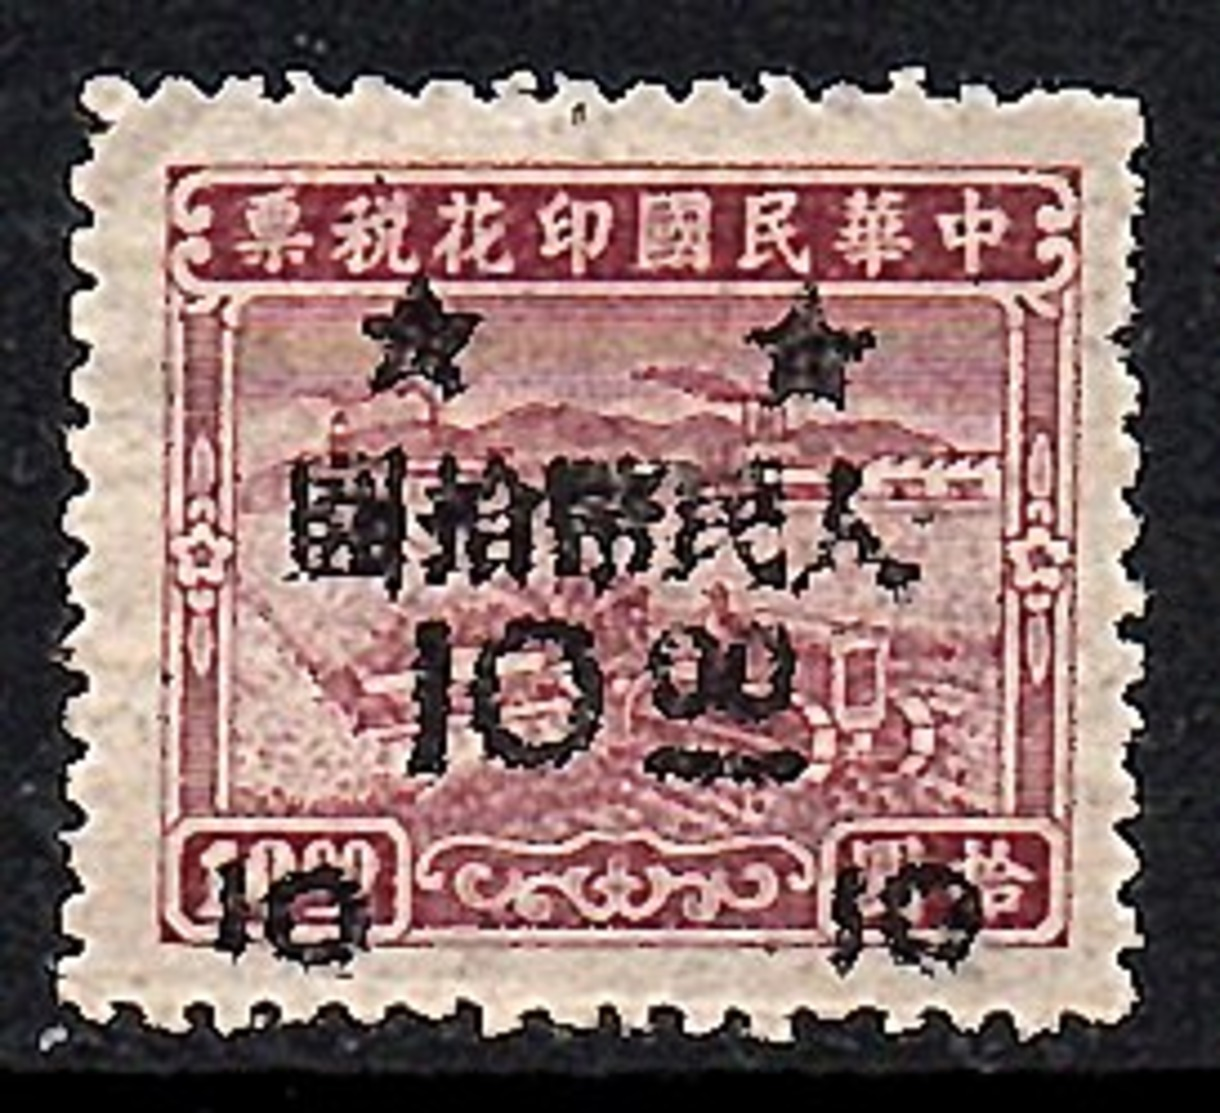 UNLISTED $10 Probably East China, Unlisted In Paau, Wettering And Padget Catalogues MH (209) - Ostchina 1949-50